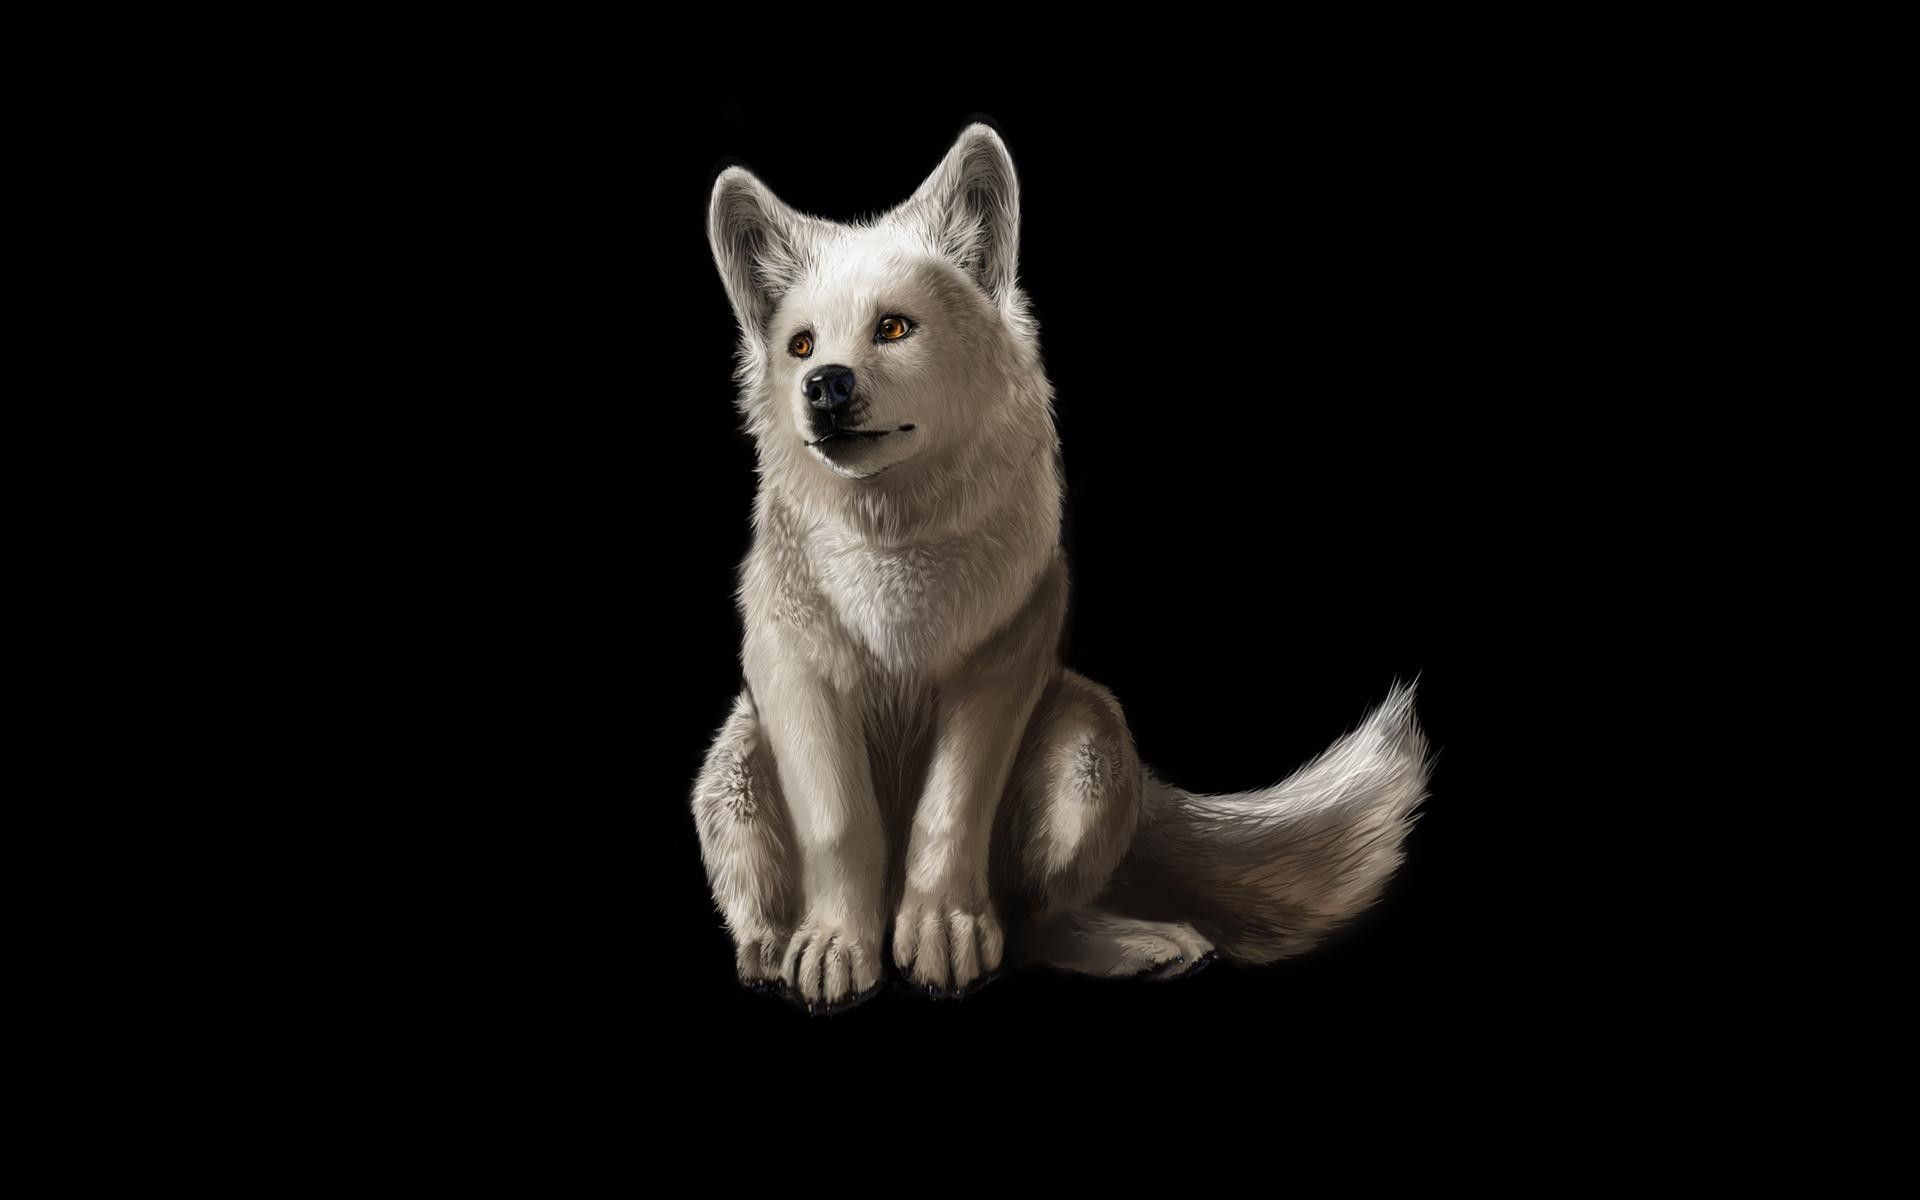 1920x1200 ... White wolf iphone wallpaper | WallPapers | Pinterest | White wolf .